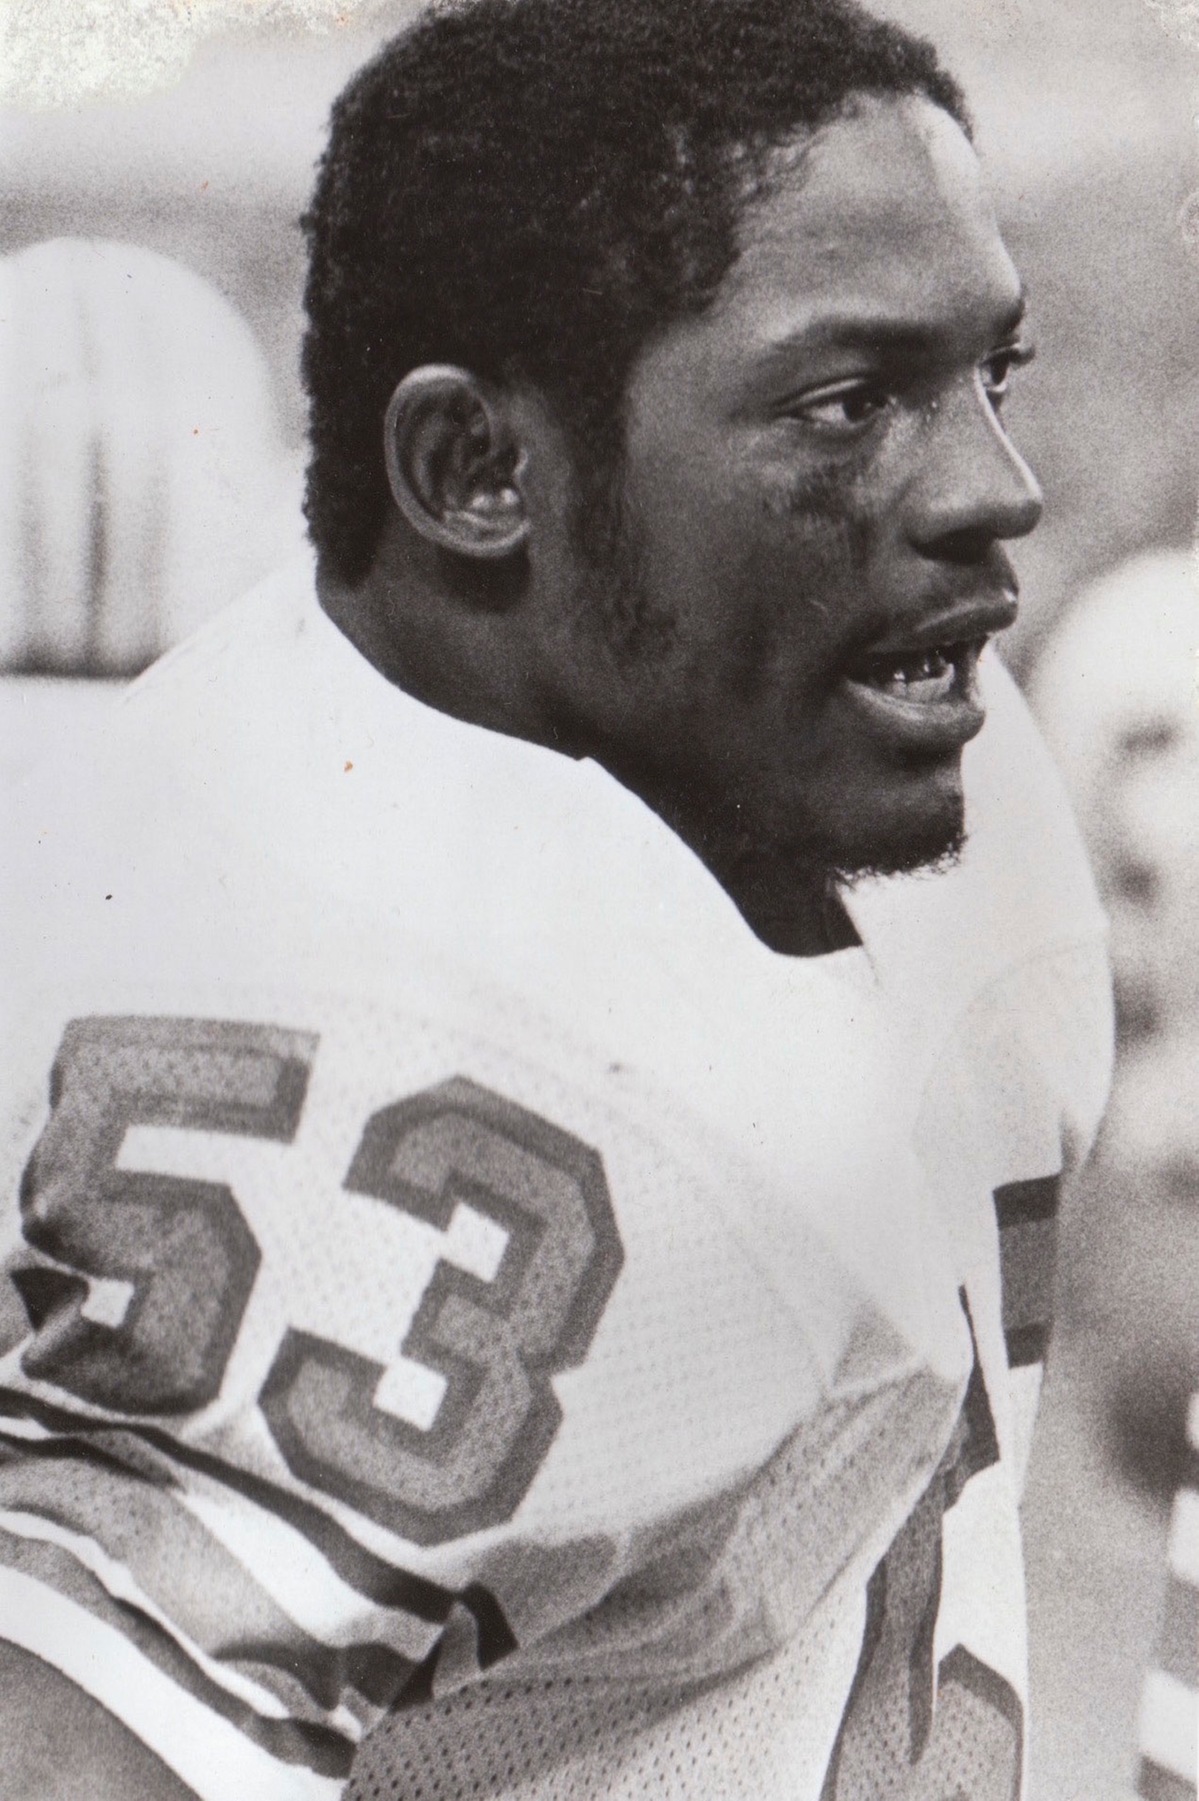 Former COC linebacker Avon Riley pictured as a member of the NFL's Houston Oilers.